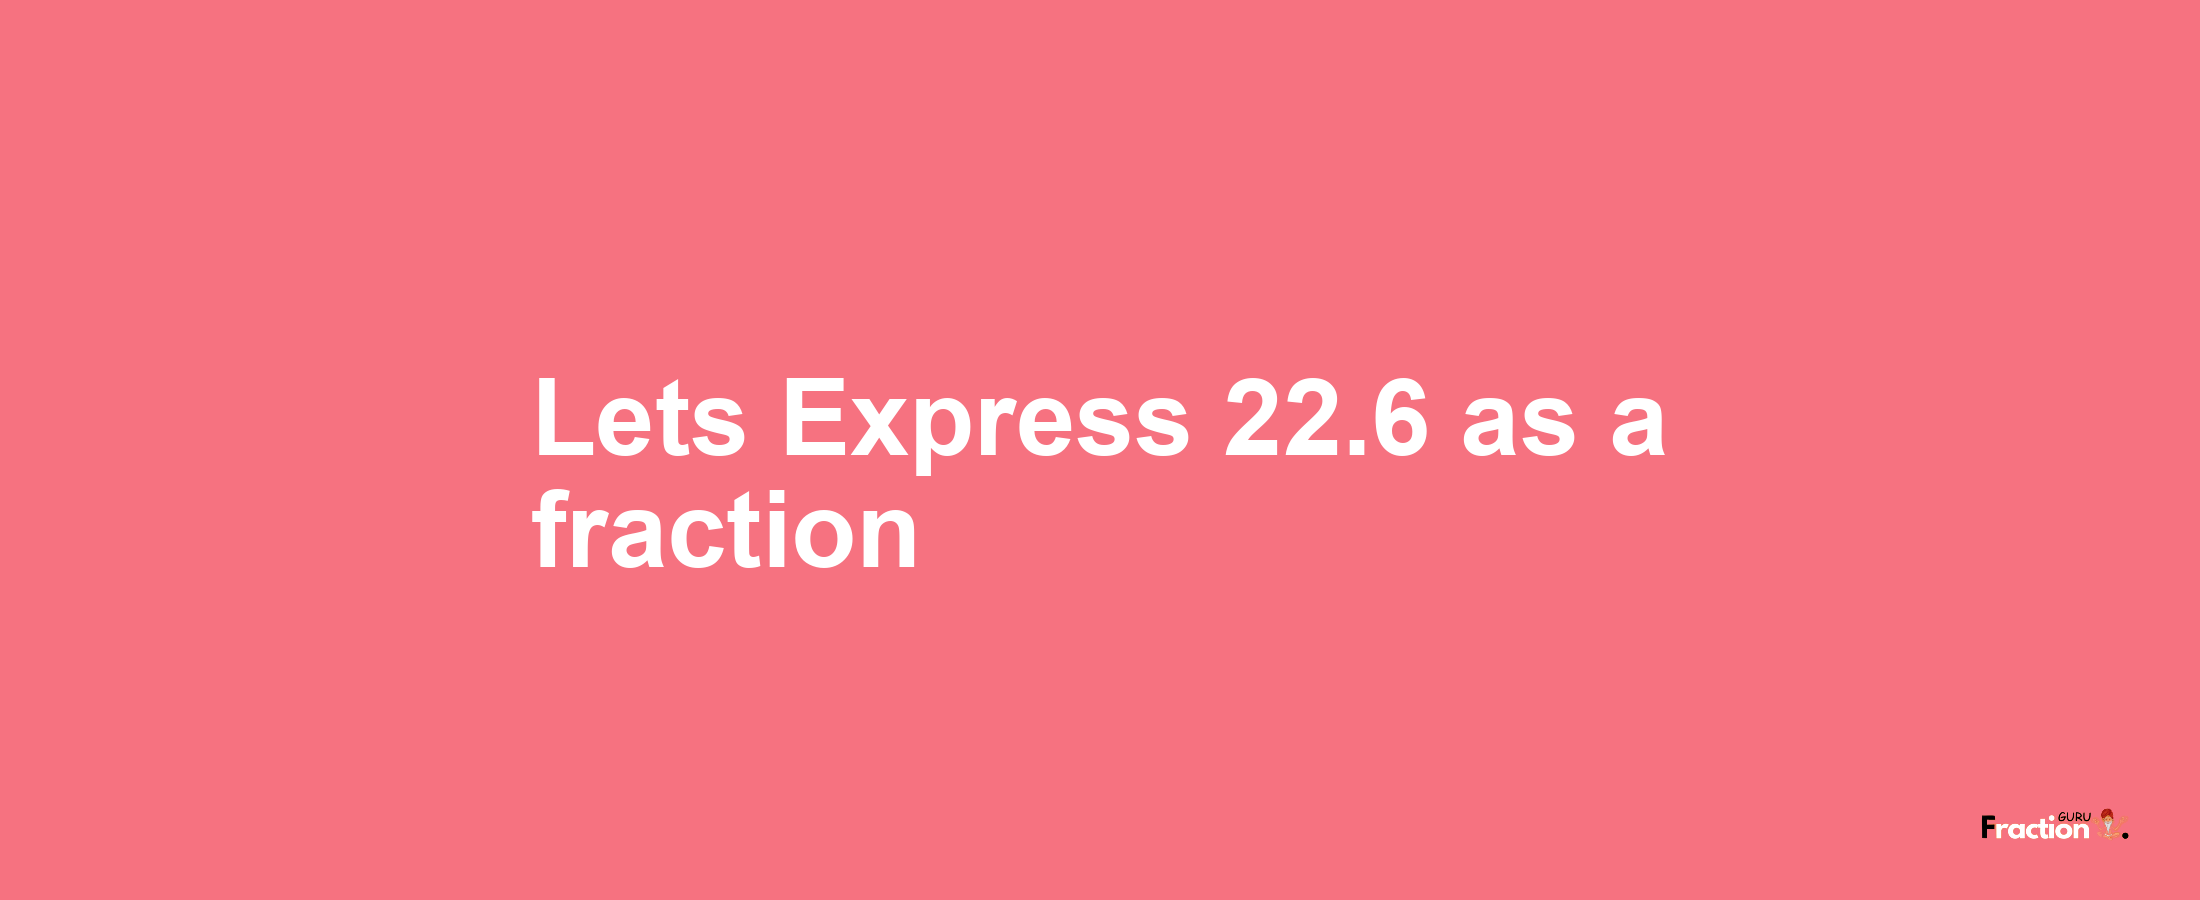 Lets Express 22.6 as afraction